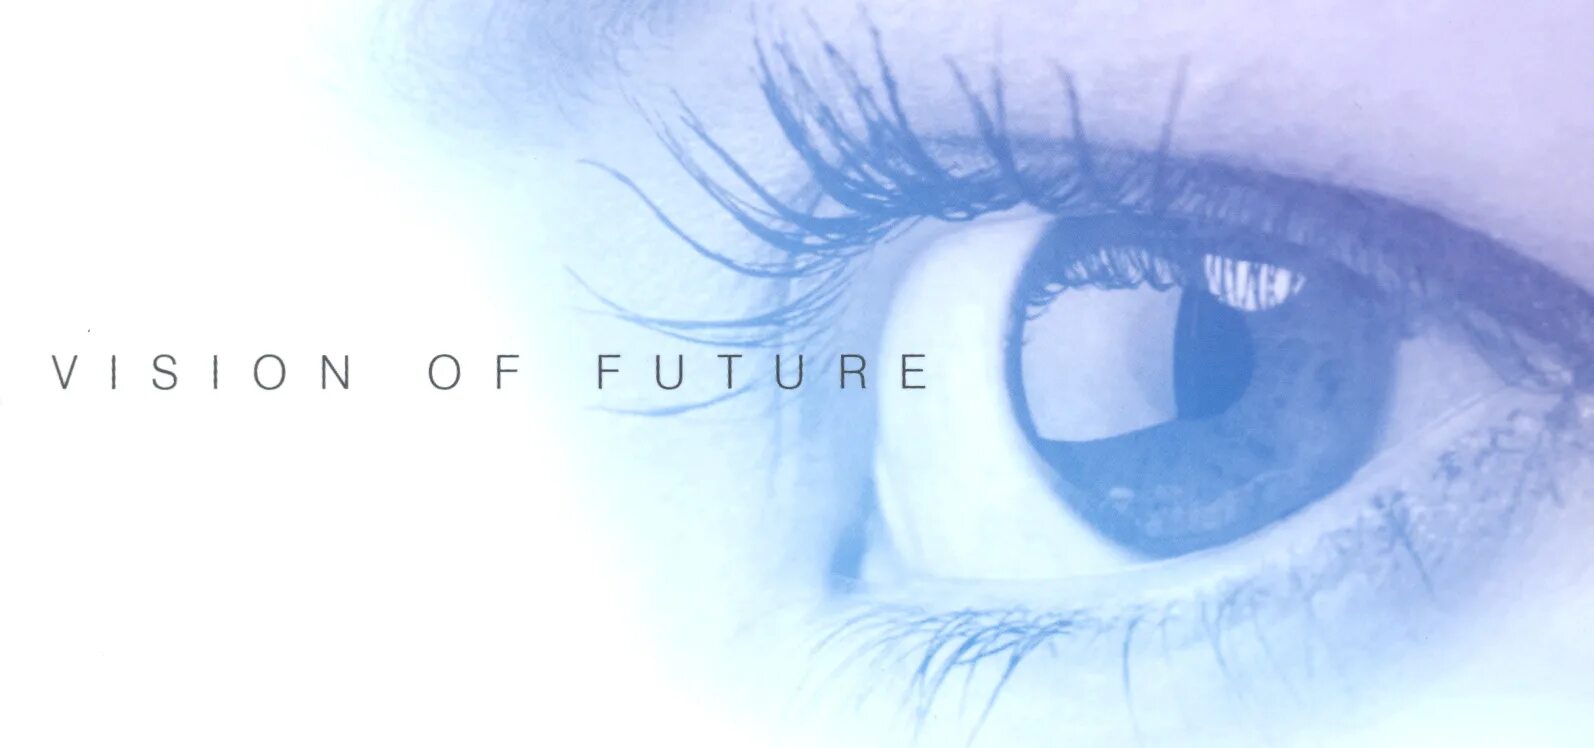 Future vision. Future Vision клип. Beautiful Vision in the Eyes. A Vision of the Future Metal.